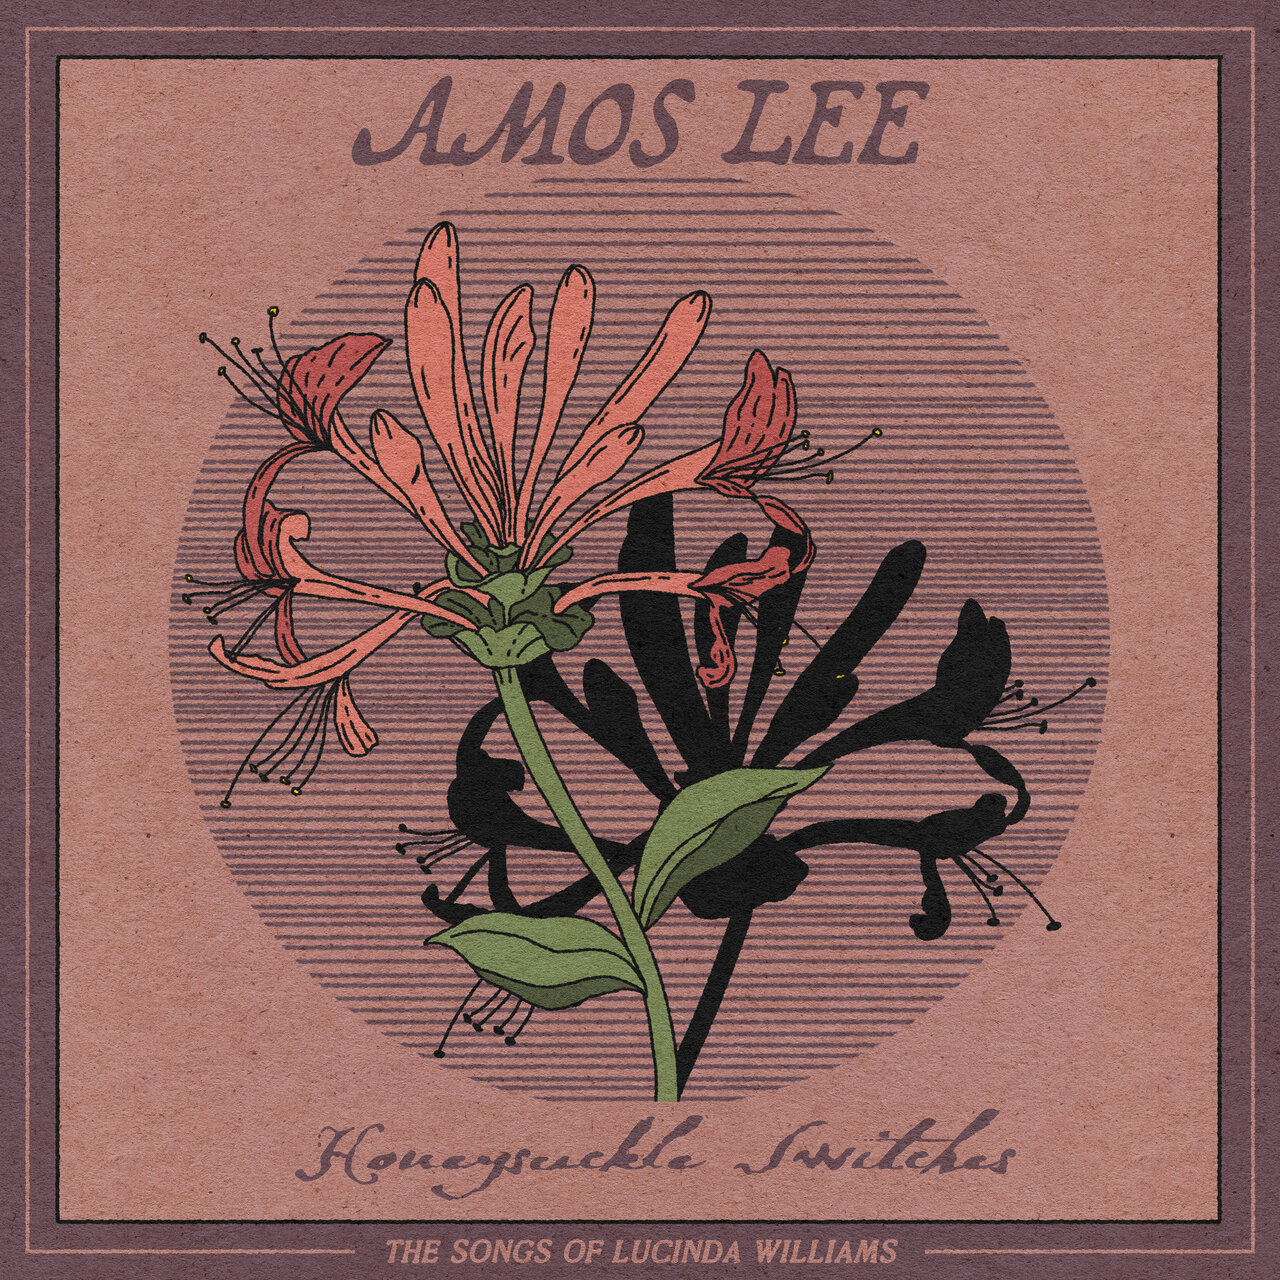 Amos Lee - 2023 - Honeysuckle Switches (The Songs of Lucinda Williams)